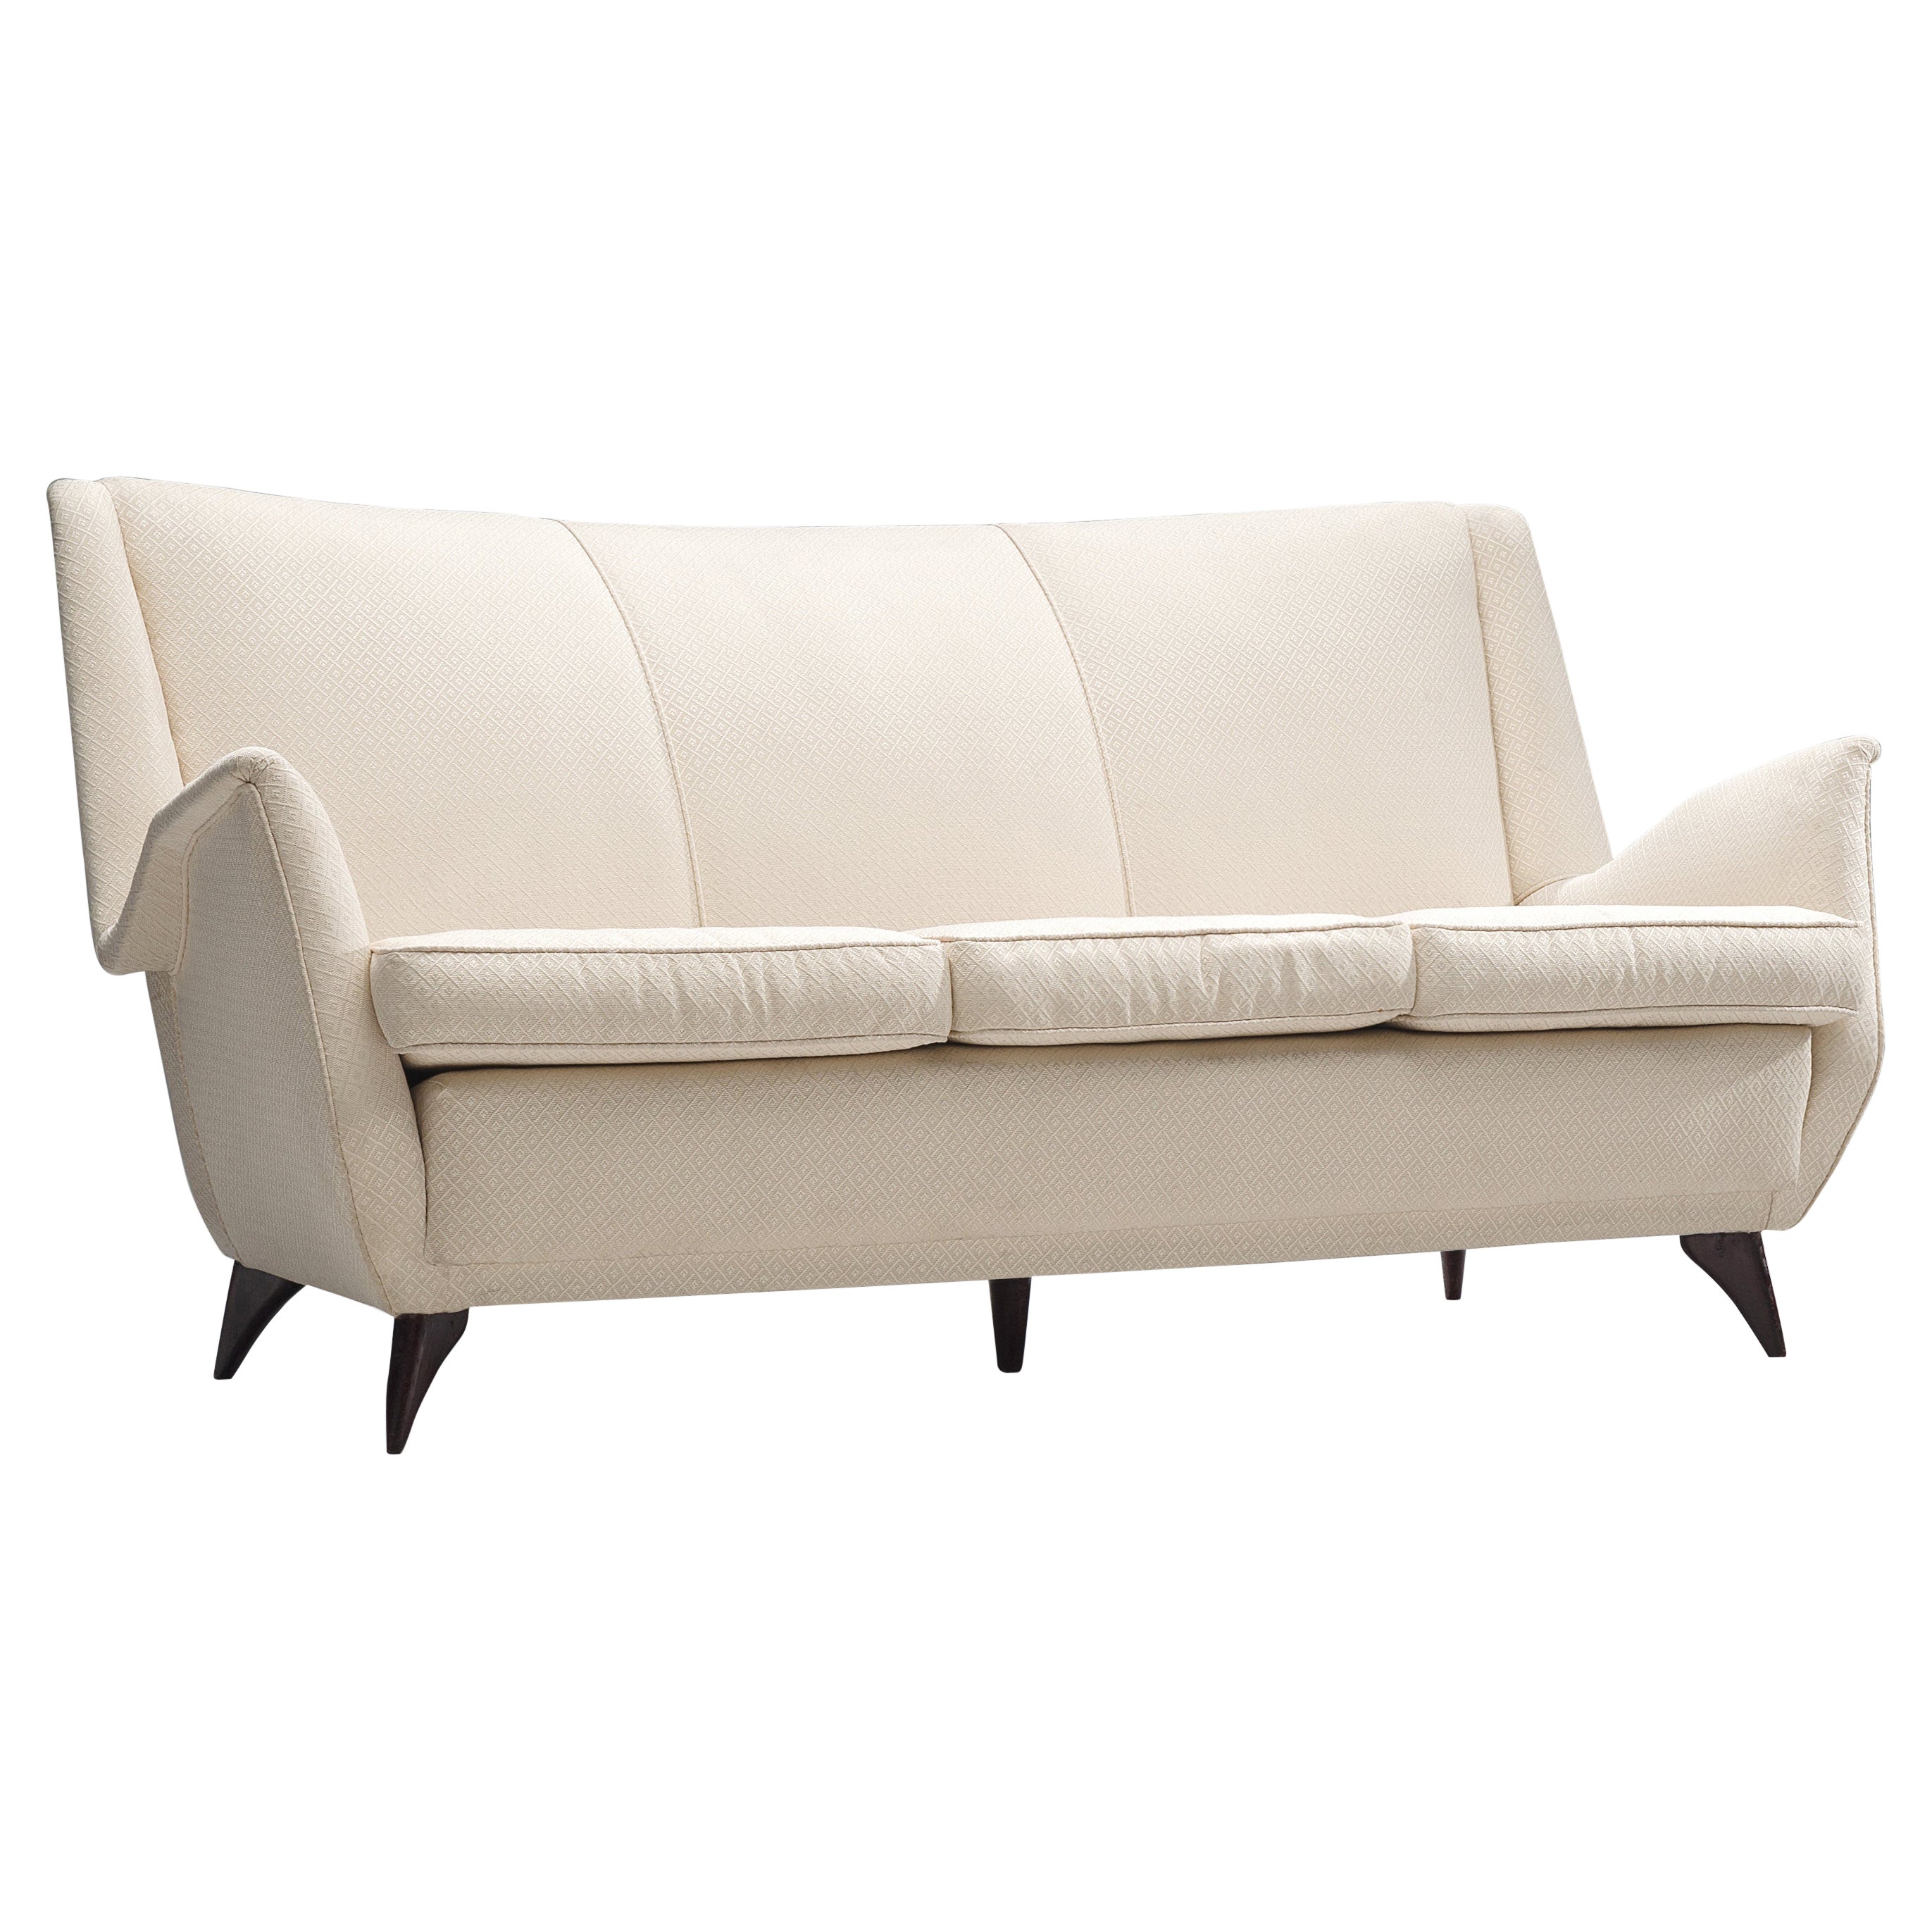 Italian Three-Seater Sofa in Off-White Upholstery 